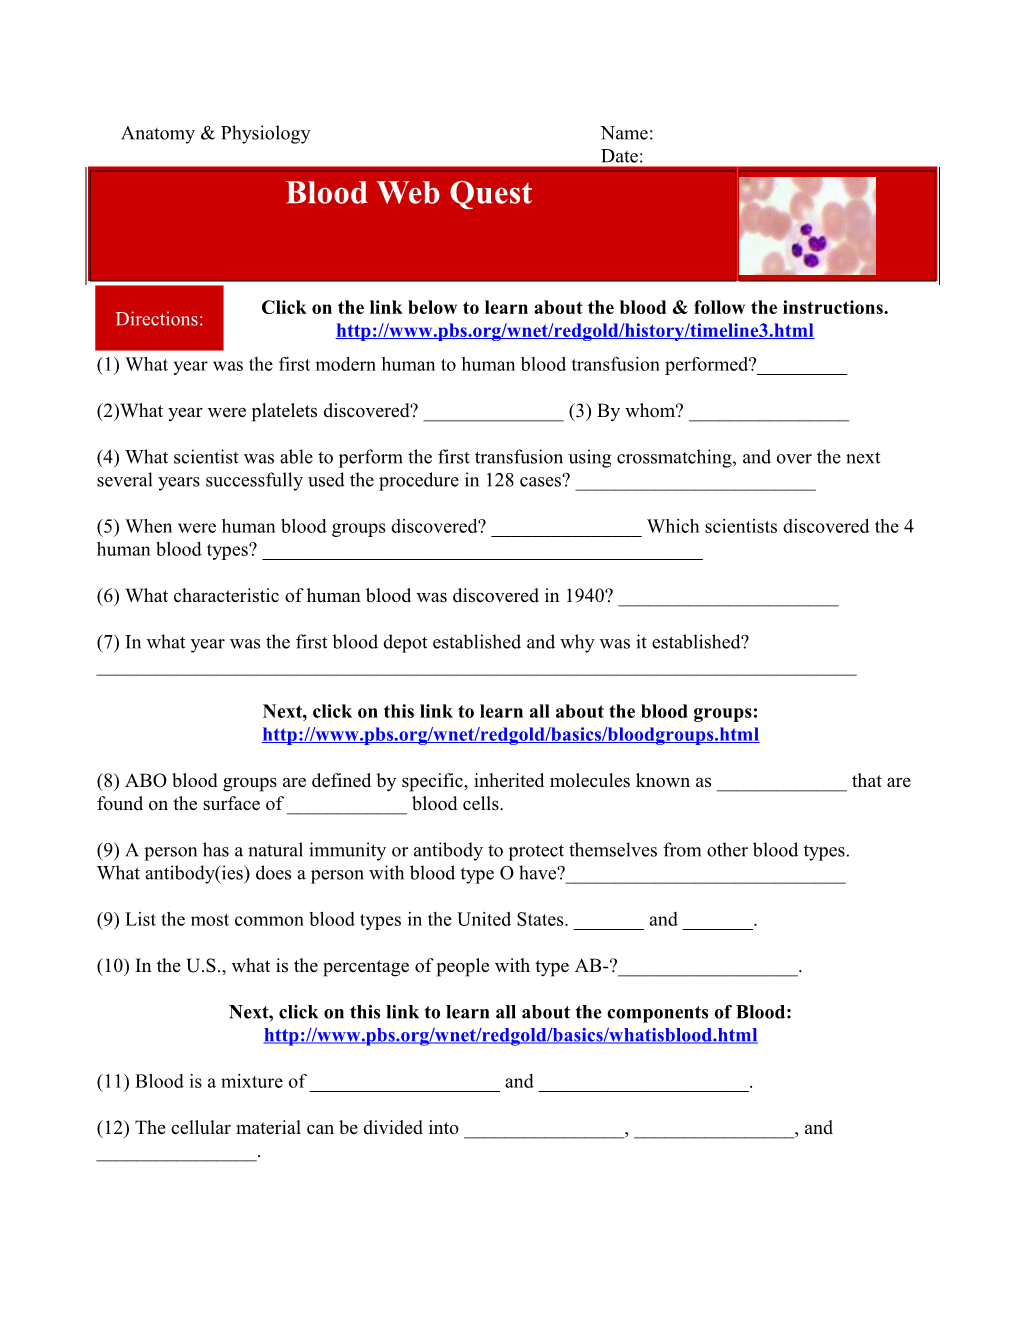 Physiology: Blood Web Quest